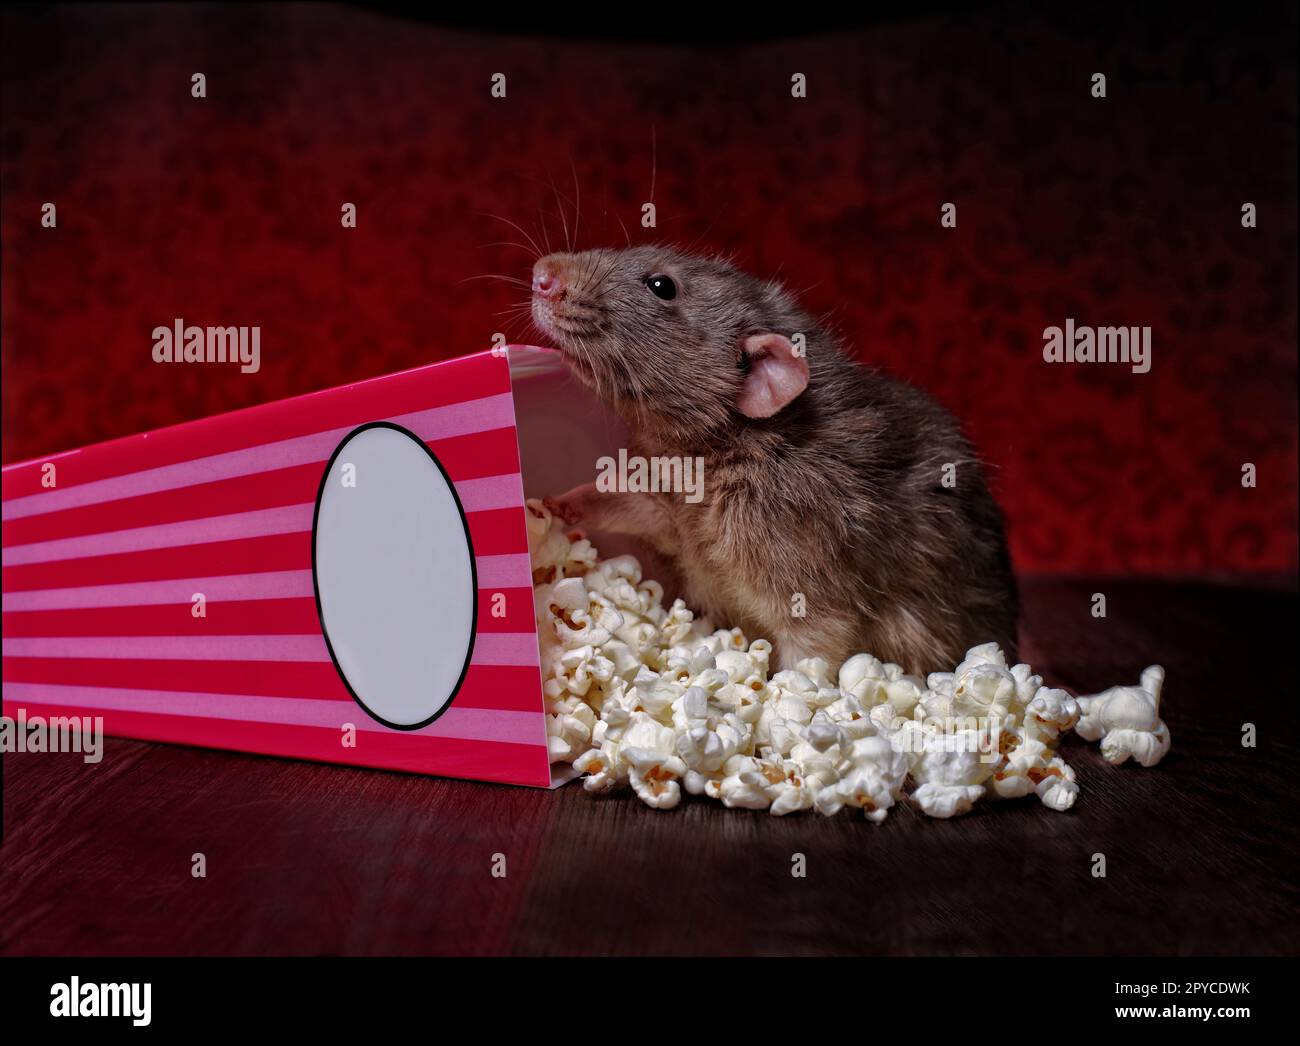 Cute rodent eating popcorn. Stock Photo